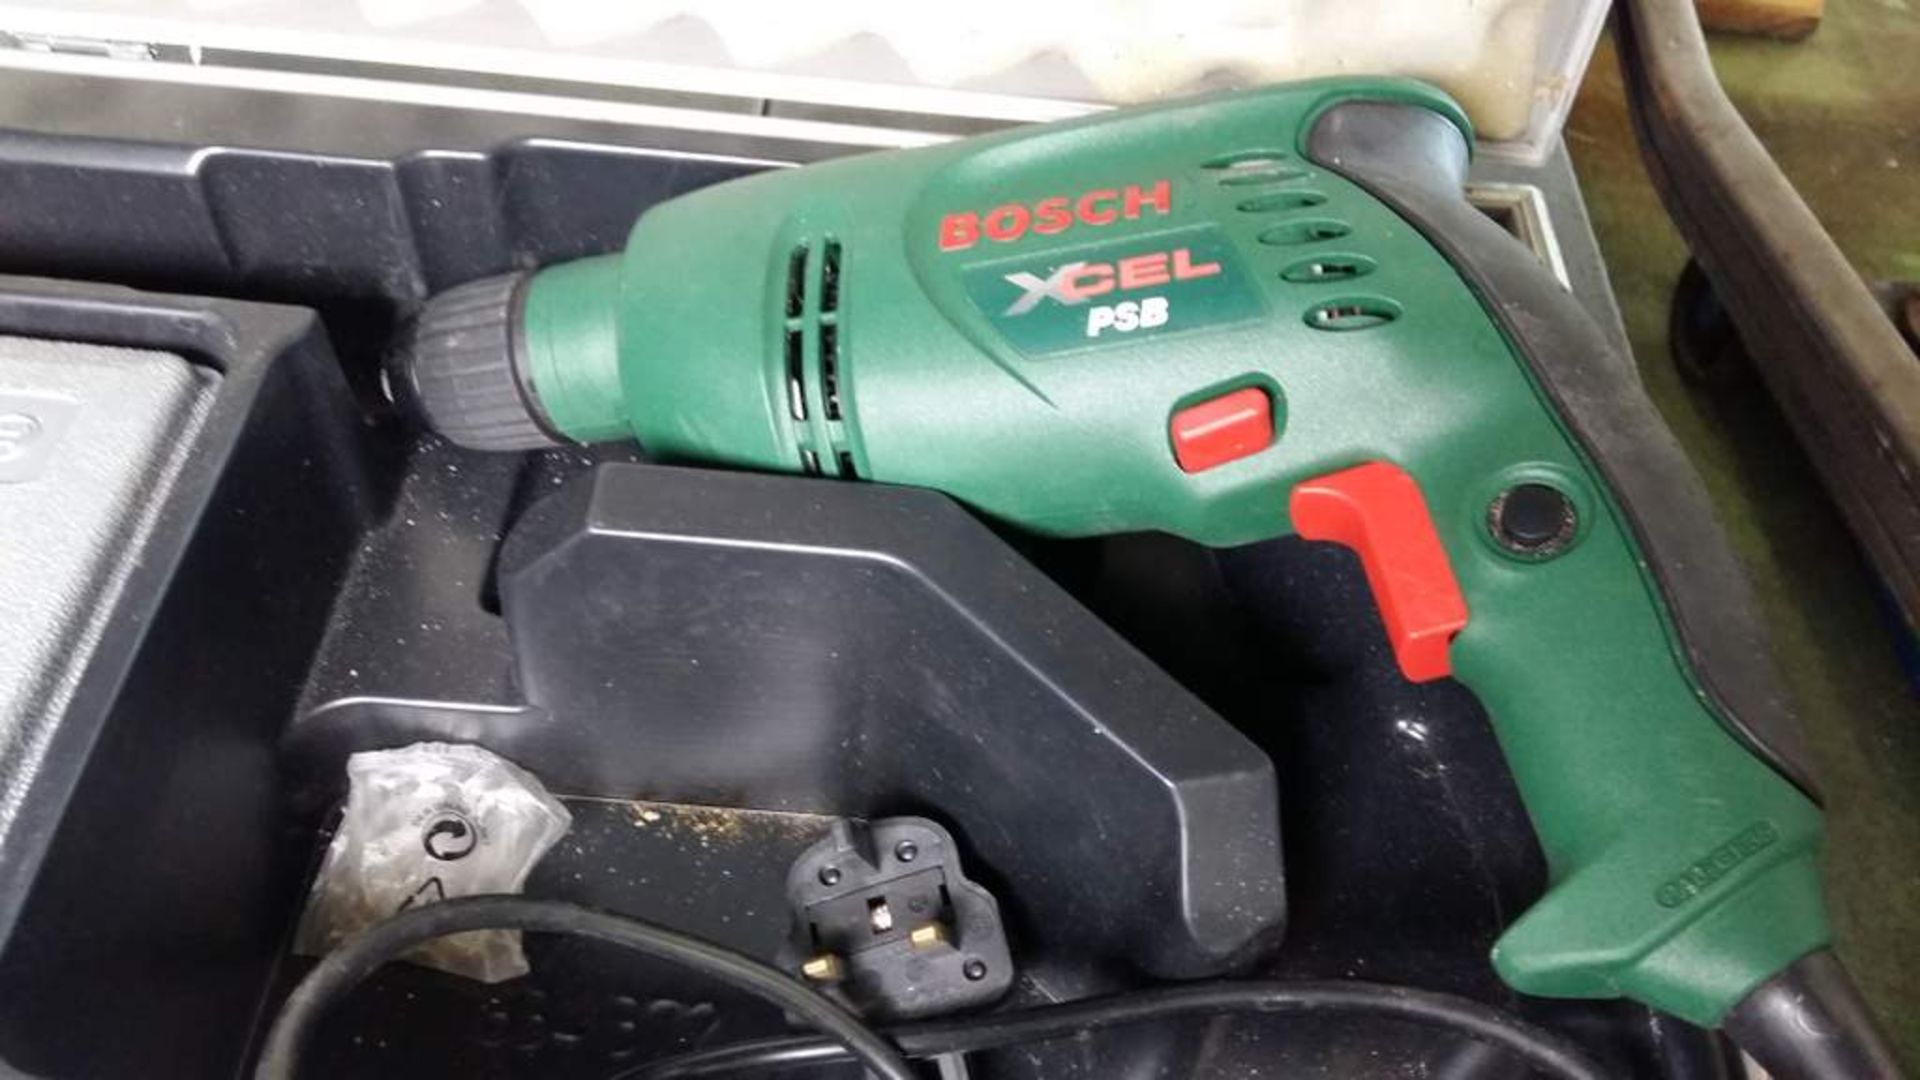 Bosch PSB 1000 RPE electric drill 230v - includes a selection of drill bits - Image 2 of 4